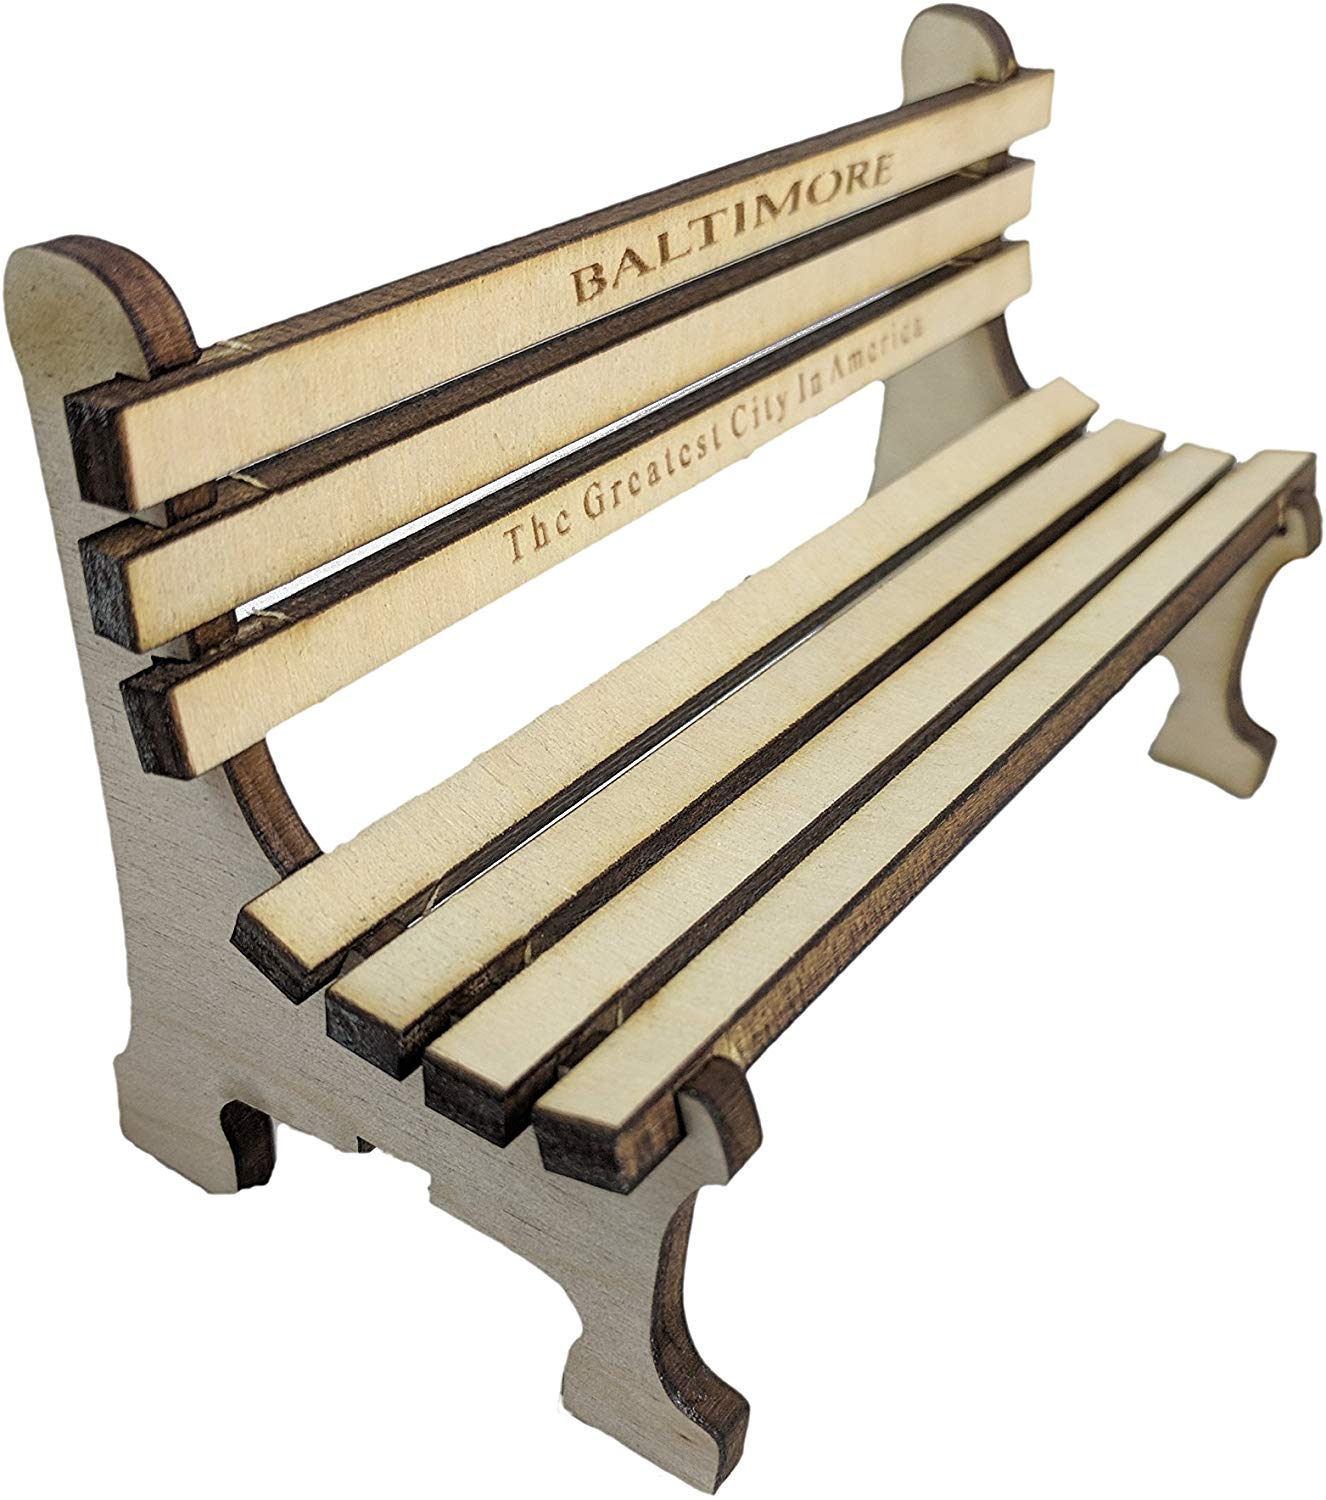 Baltimore Bench Kit The Greatest Gift In America Miniature Wooden R Custom 3d Stuff